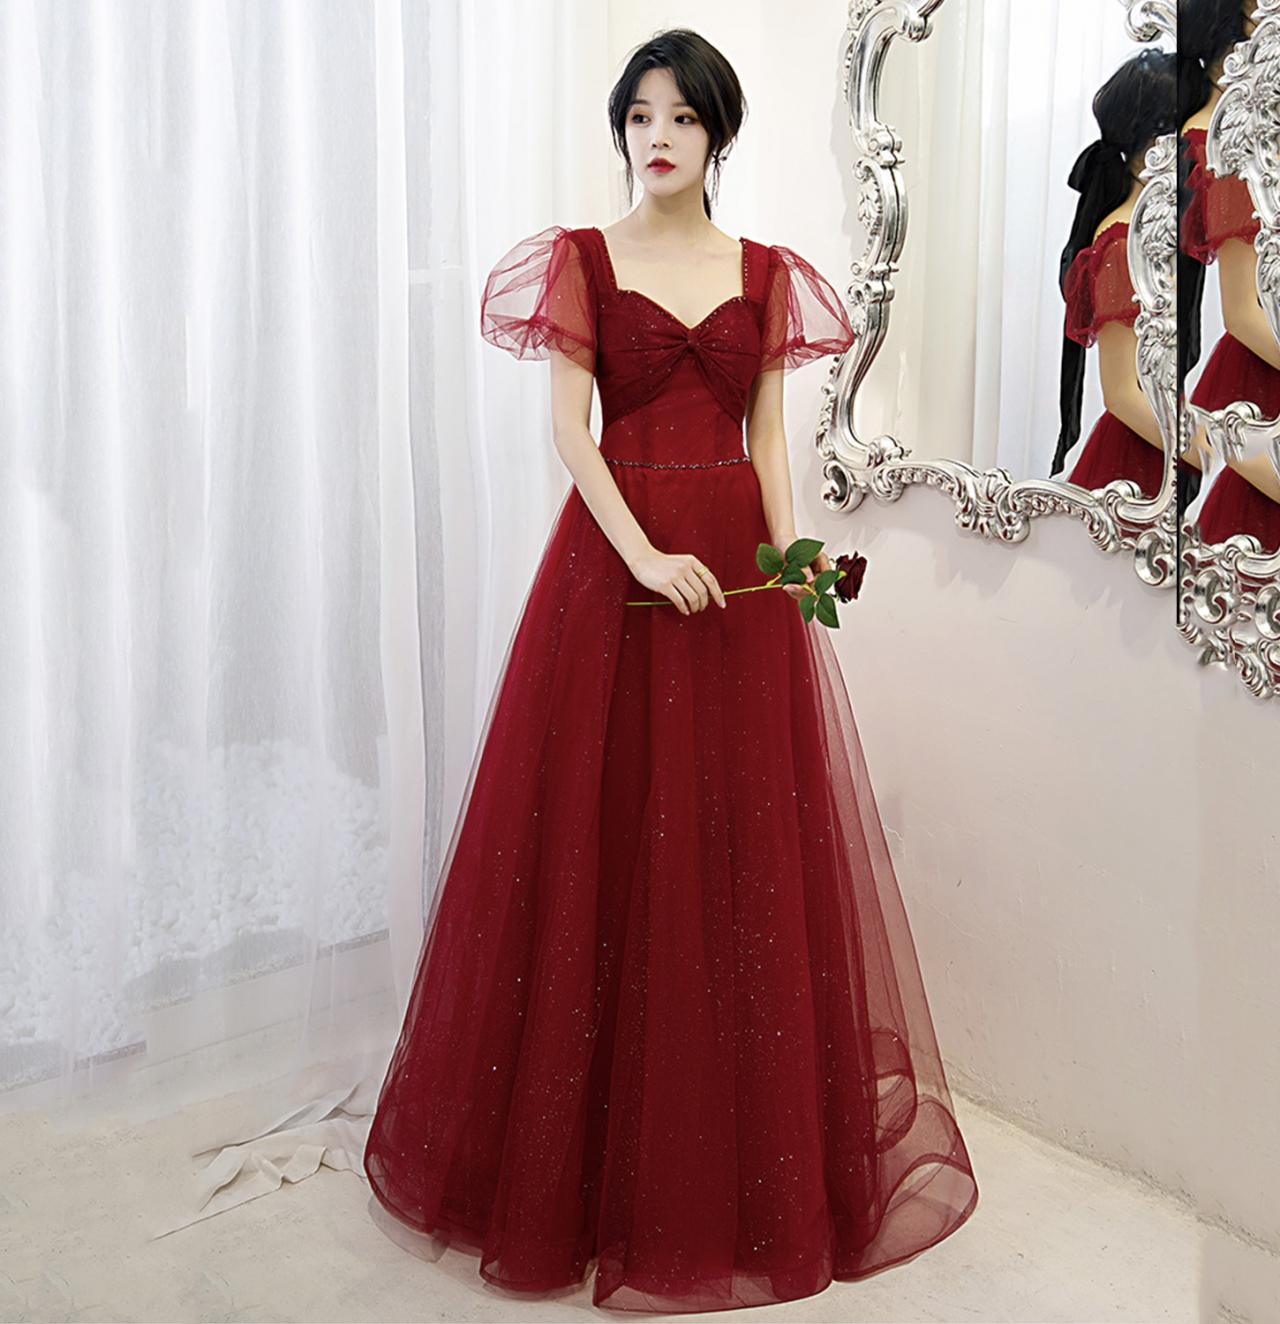 Burgundy Tulle Long A Line Prom Dress Evening Gown